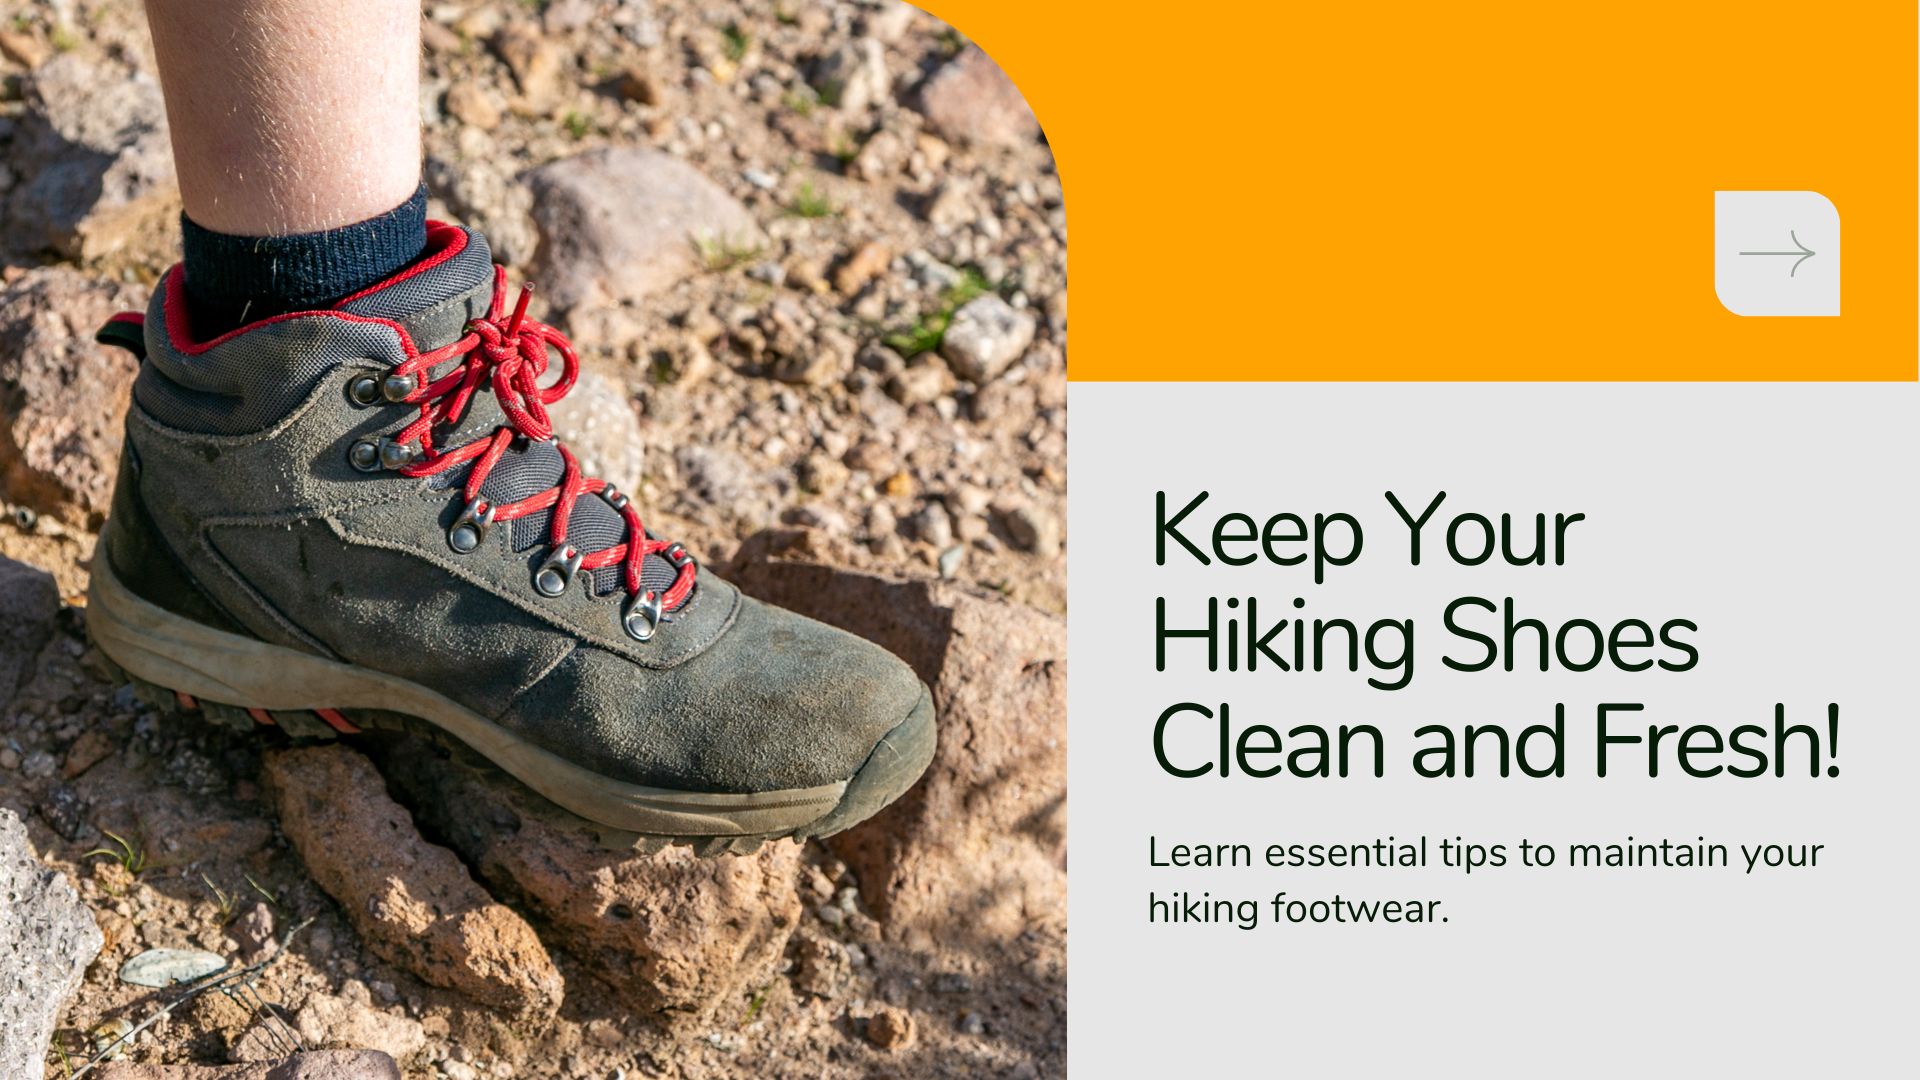 How to Clean Hiking Shoes?